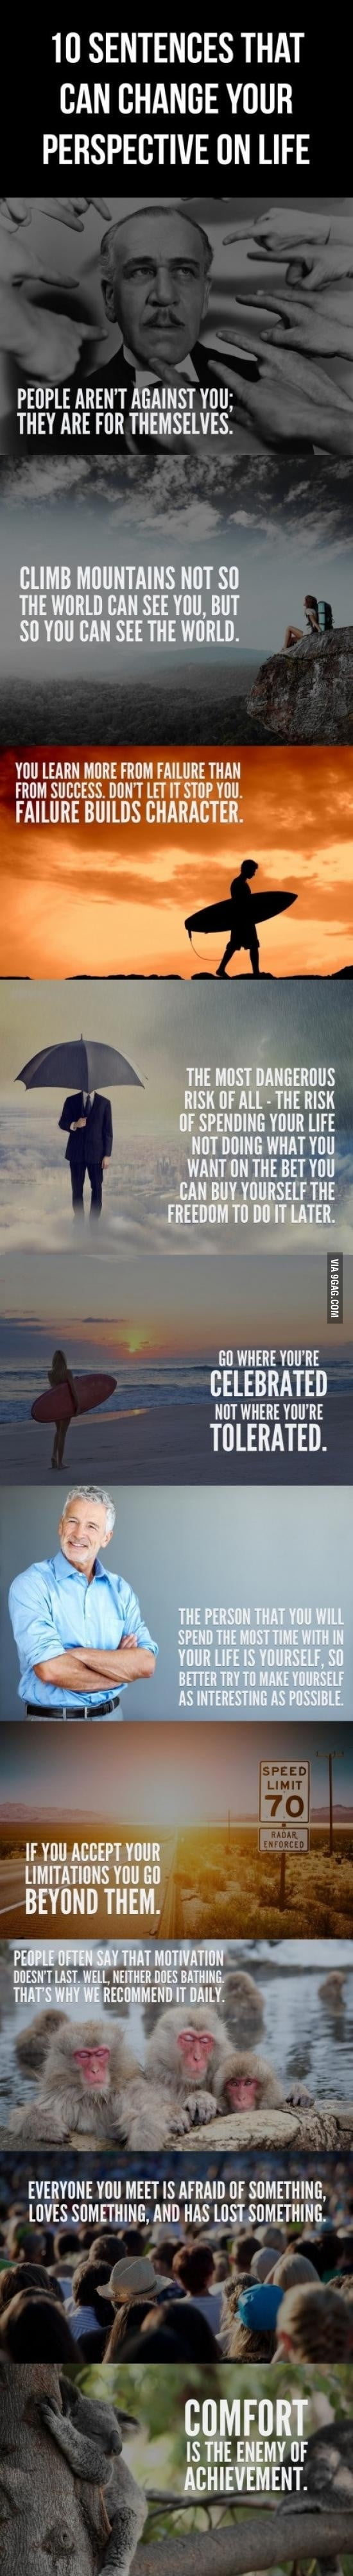 10 Powerful Sentences to Help Change Your Perspective on Life. - 9GAG